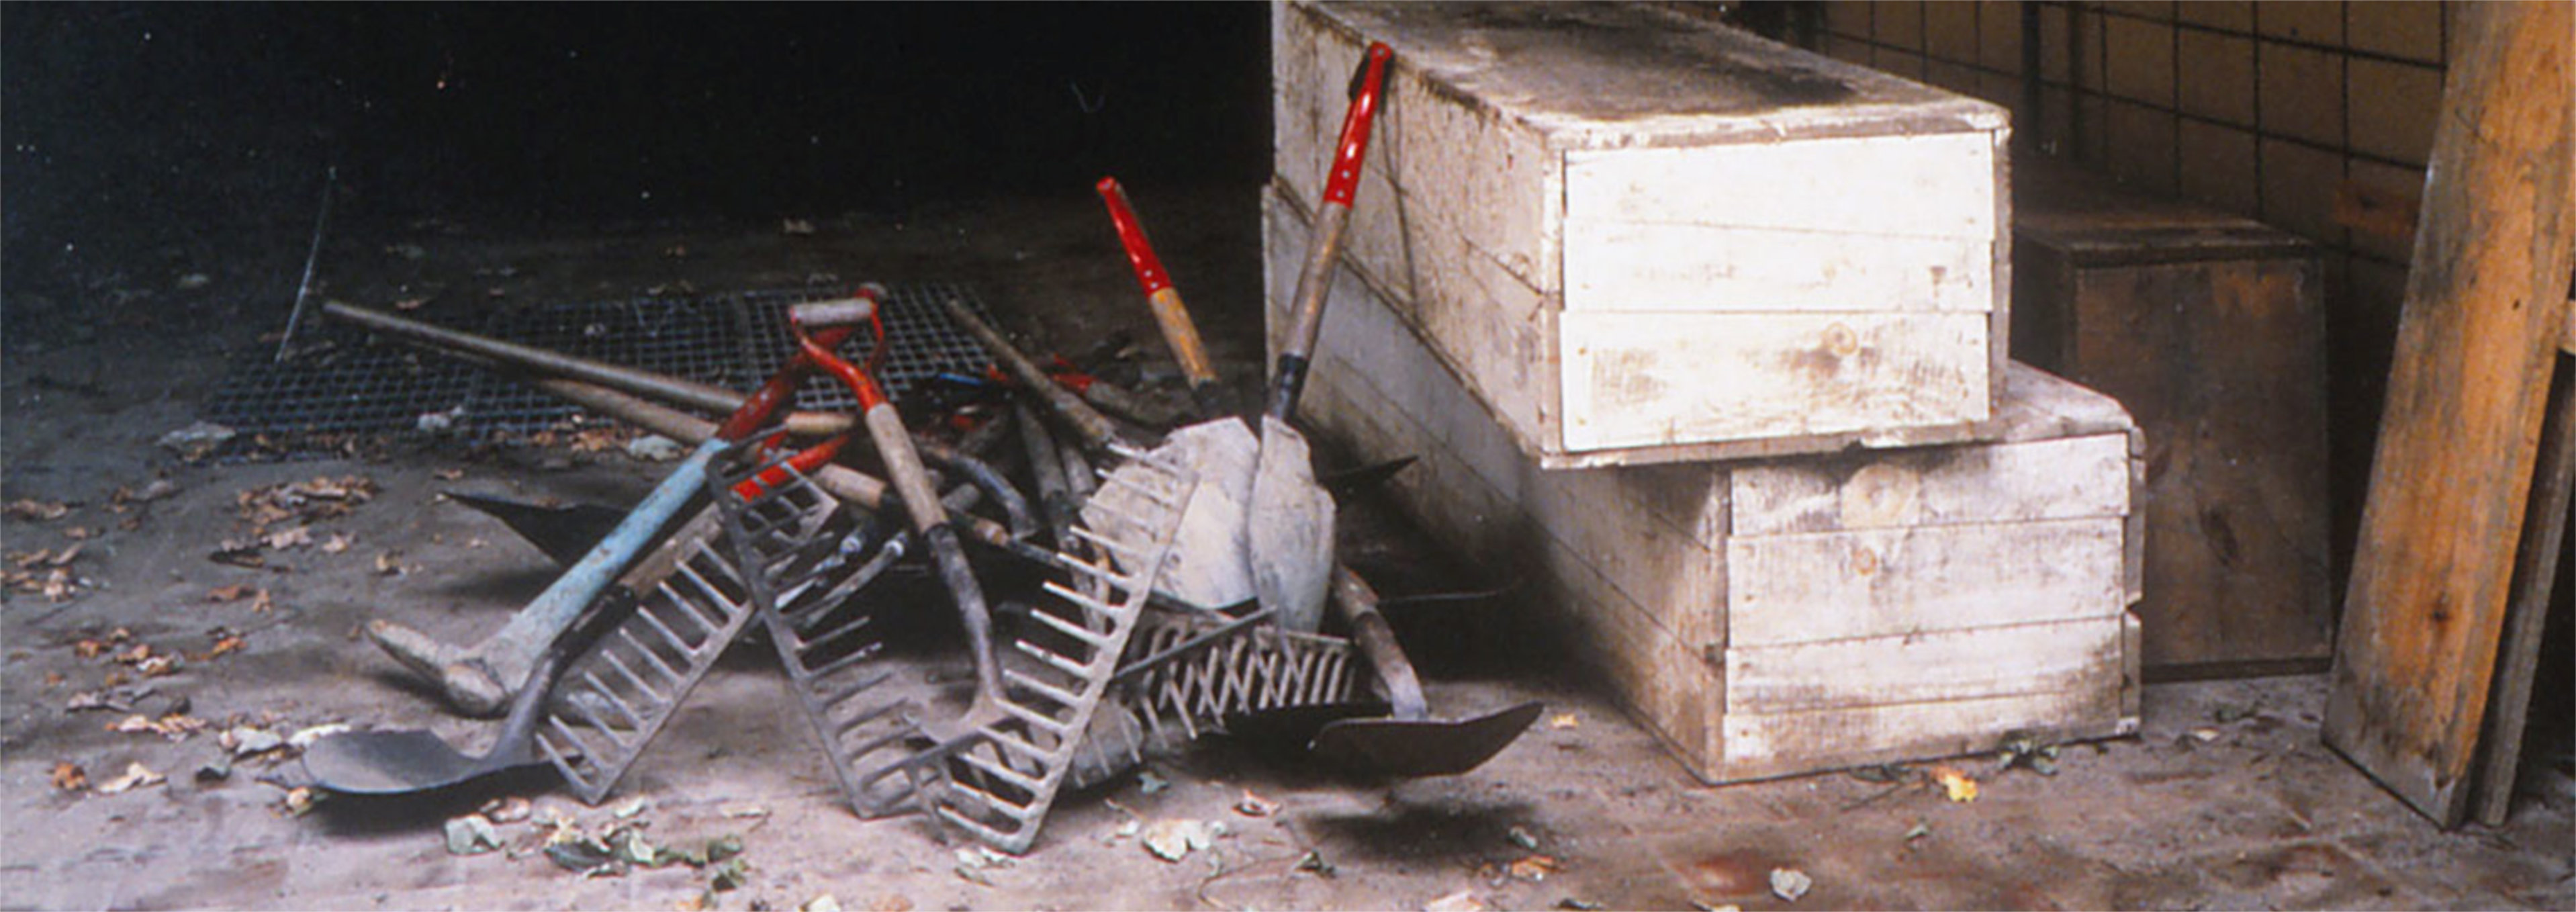 Image of working tools